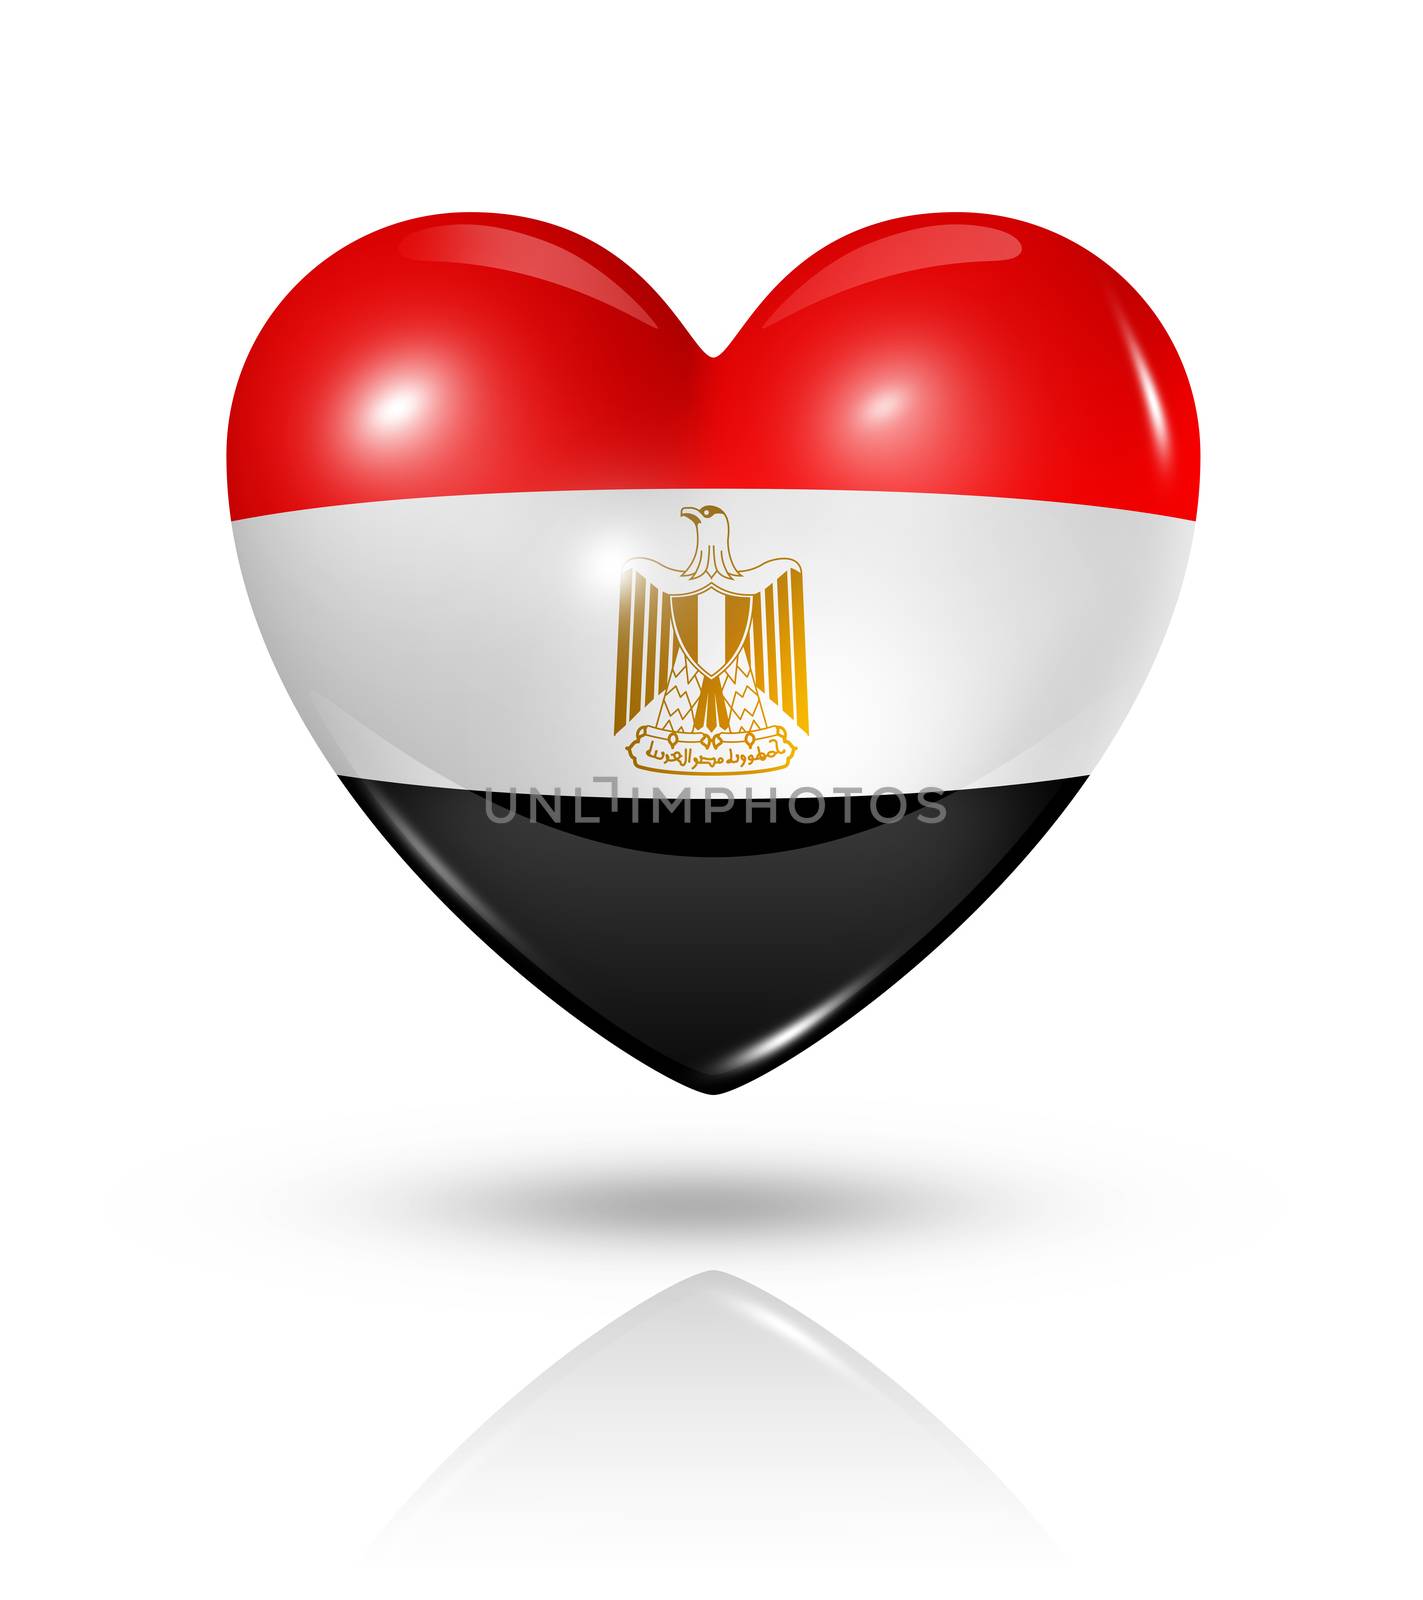 Love Egypt symbol. 3D heart flag icon isolated on white with clipping path